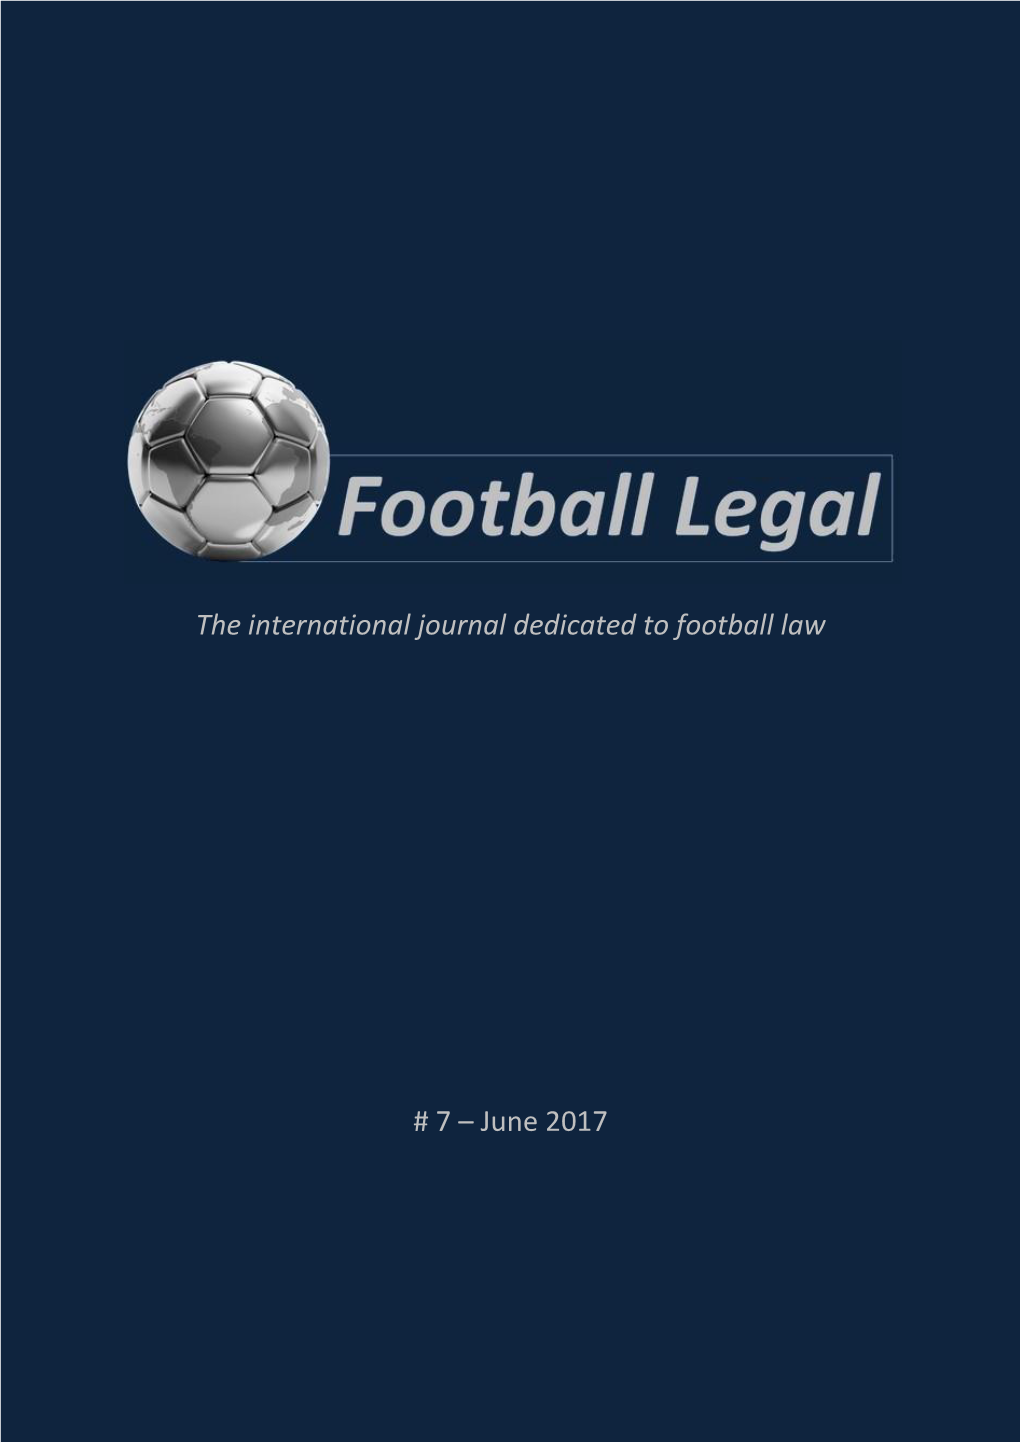 Football Legal # 1 - June 2014 Special Report: Third Party Ownership (TPO)